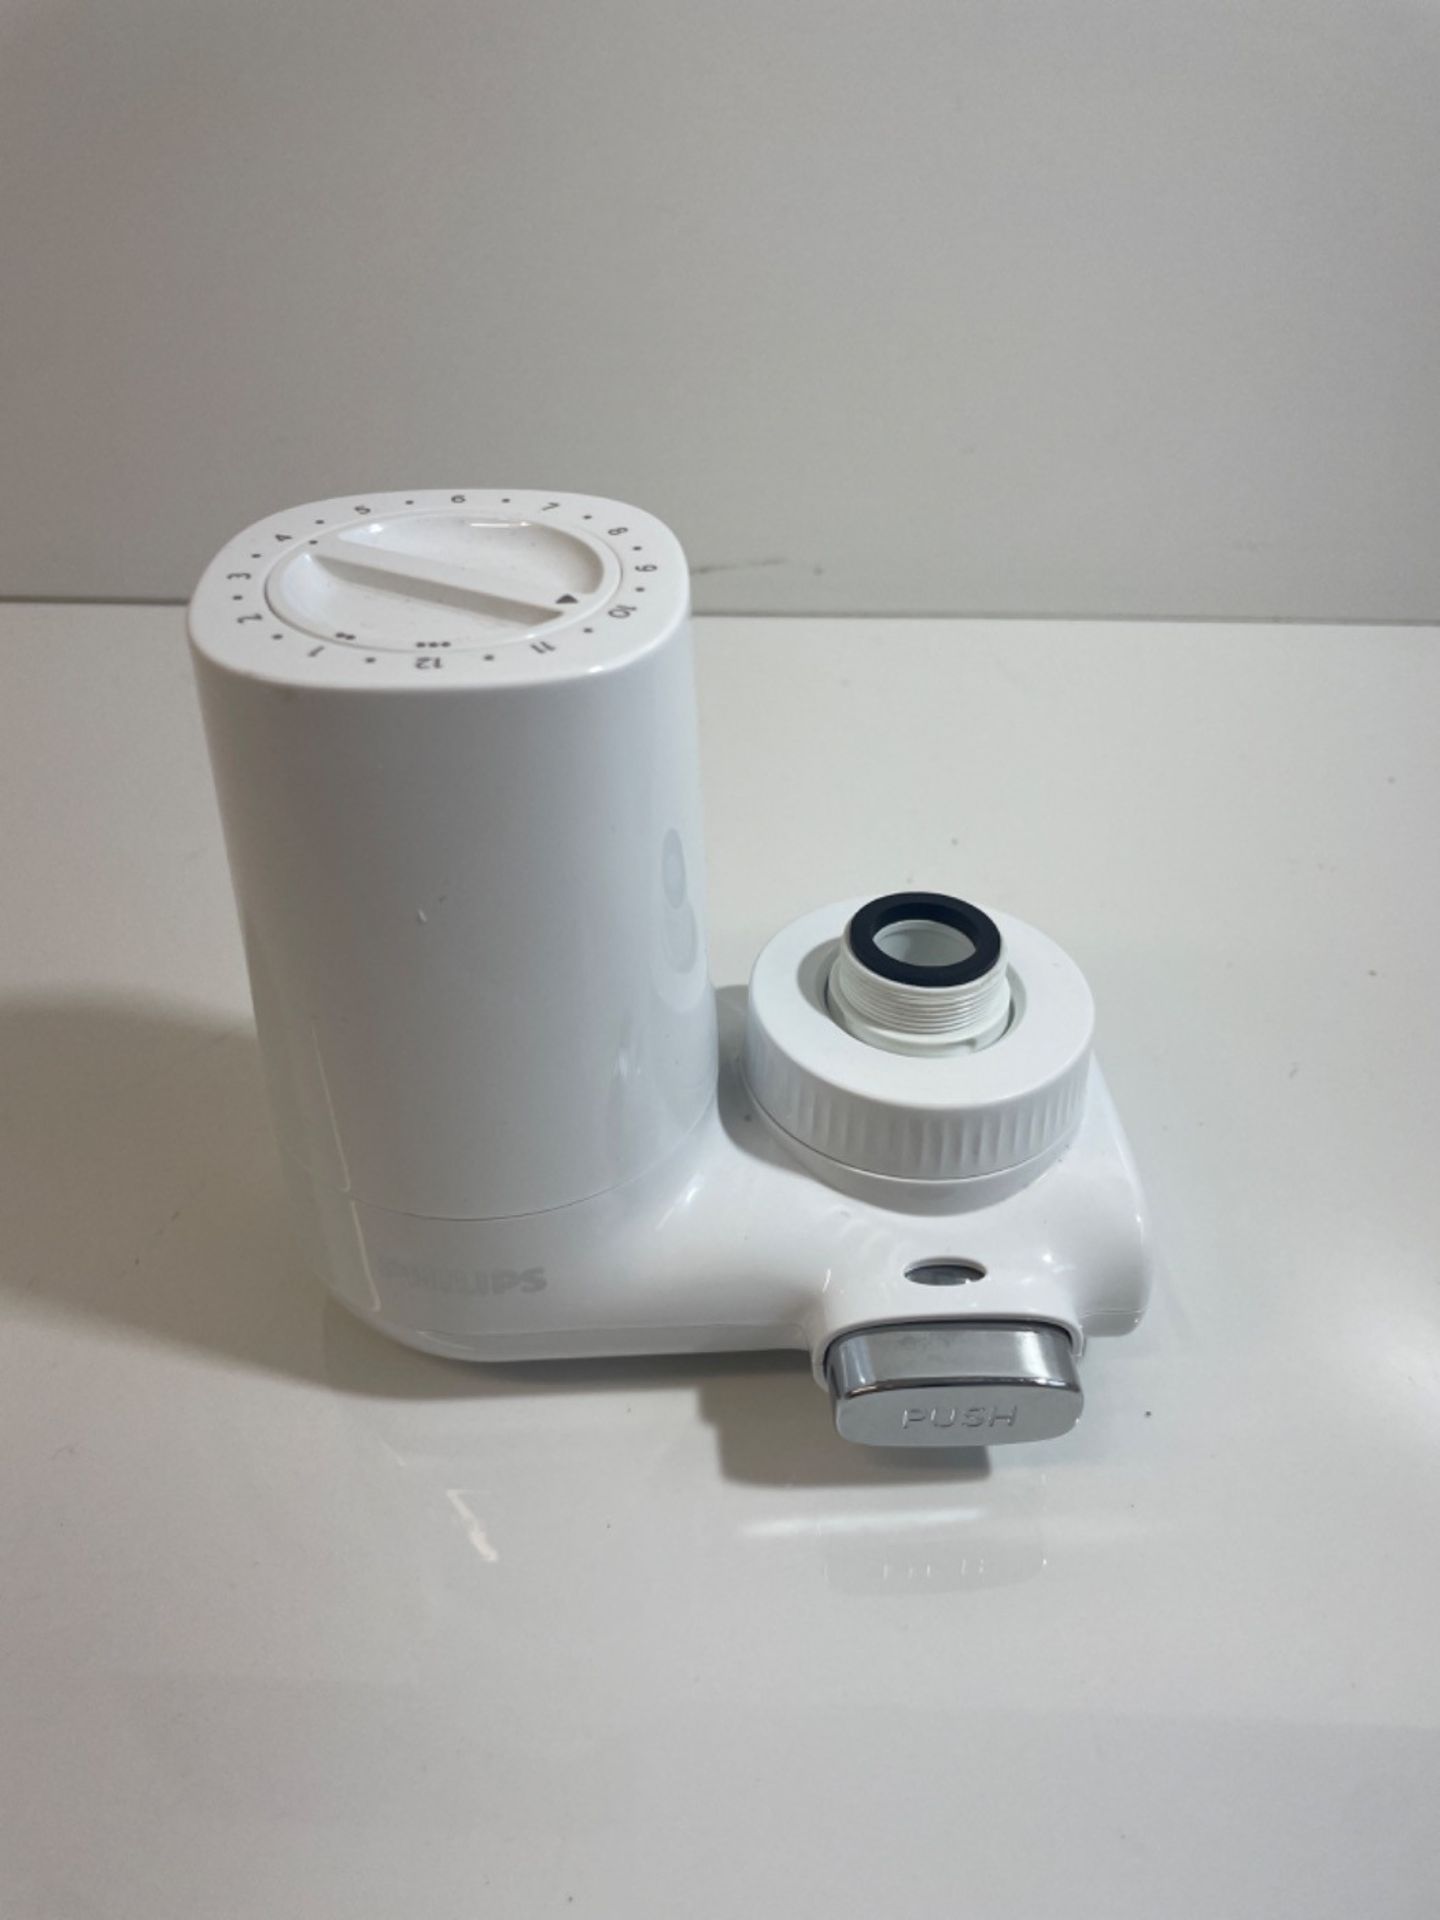 Philips On Tap Water Filter, X-Guard Vertical, White - Image 2 of 3